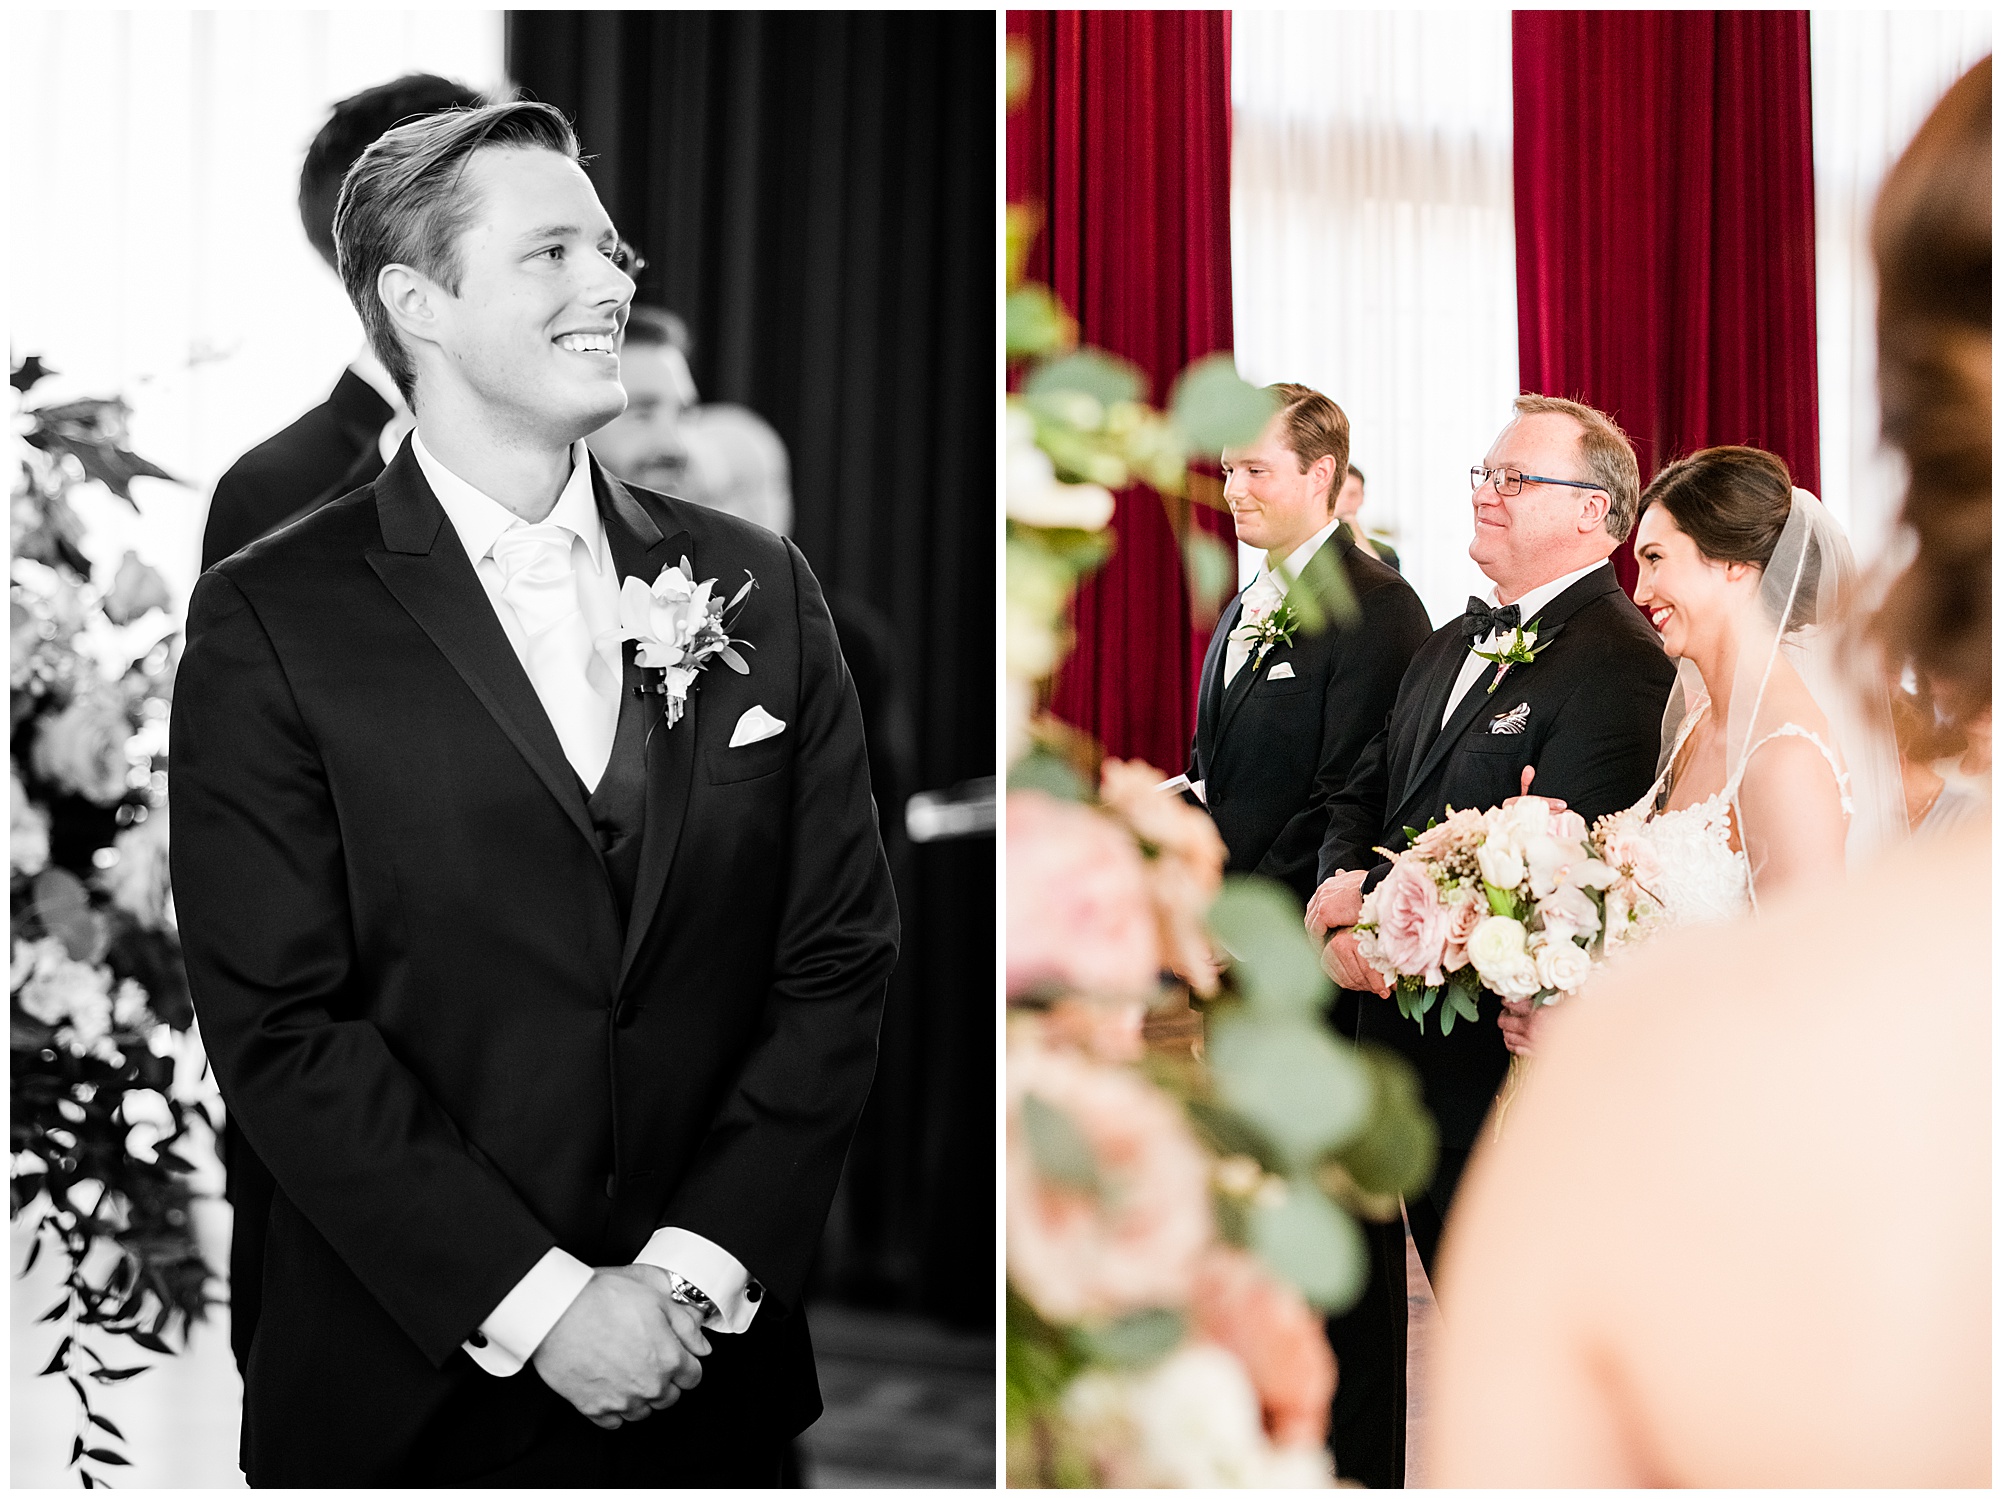 wedding ceremony in the ballroom at dover hall. groom watching bride walking down the aisle. by richmond rva wedding photographer, sarah & dave photography.